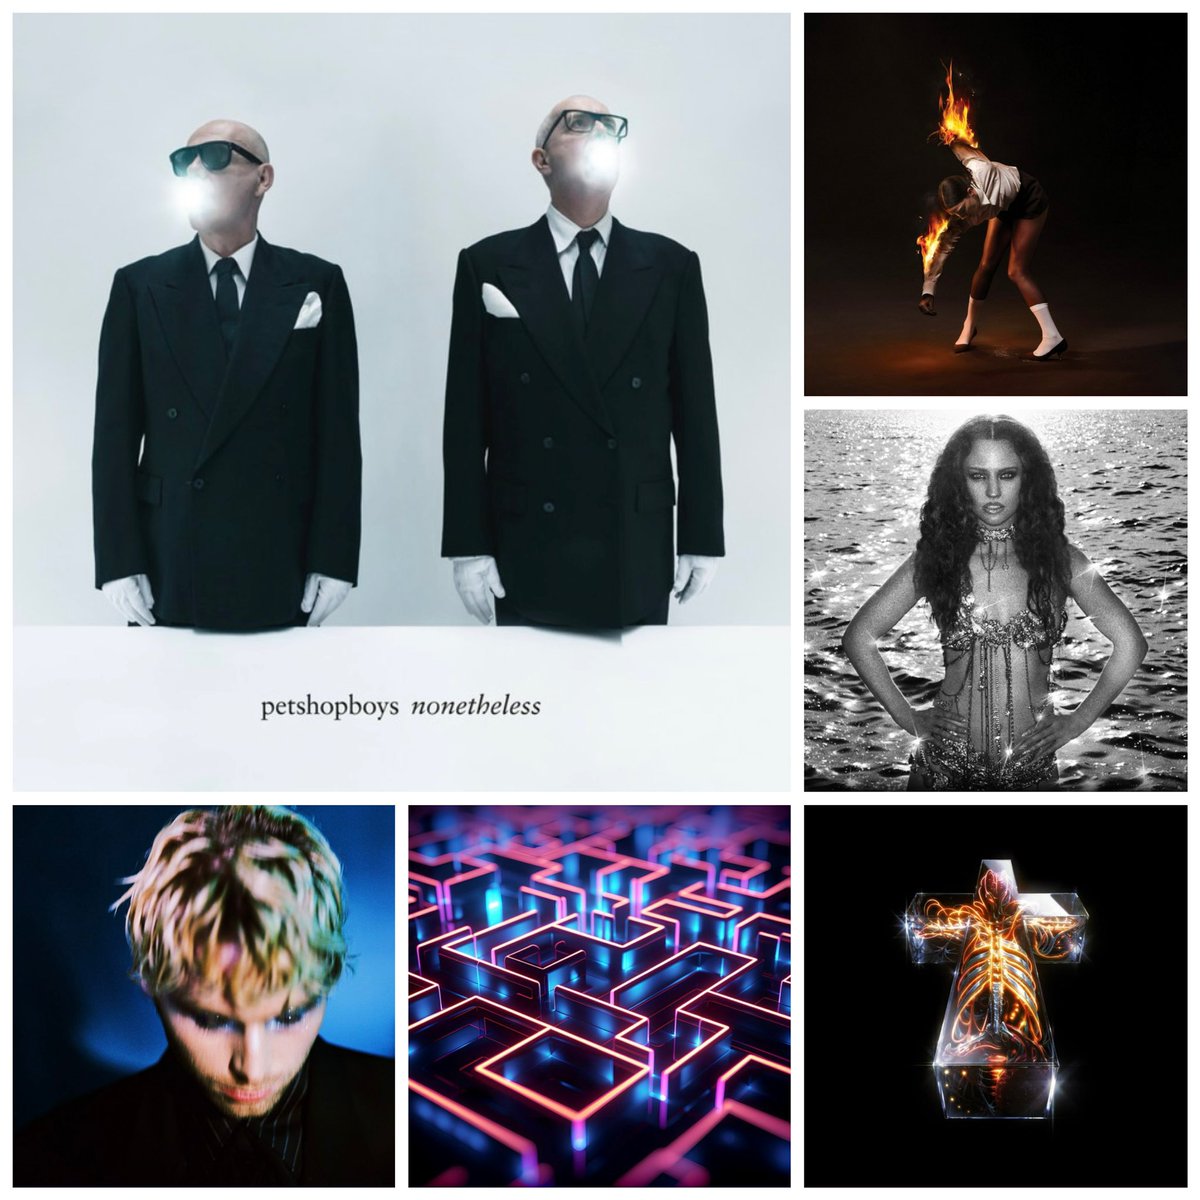 New releases this week from: @petshopboys @st_vincent @jessglynne #Justice @Luke5SOS @ZutonsThe & more! #NewMusicFriday #playlist #NMF